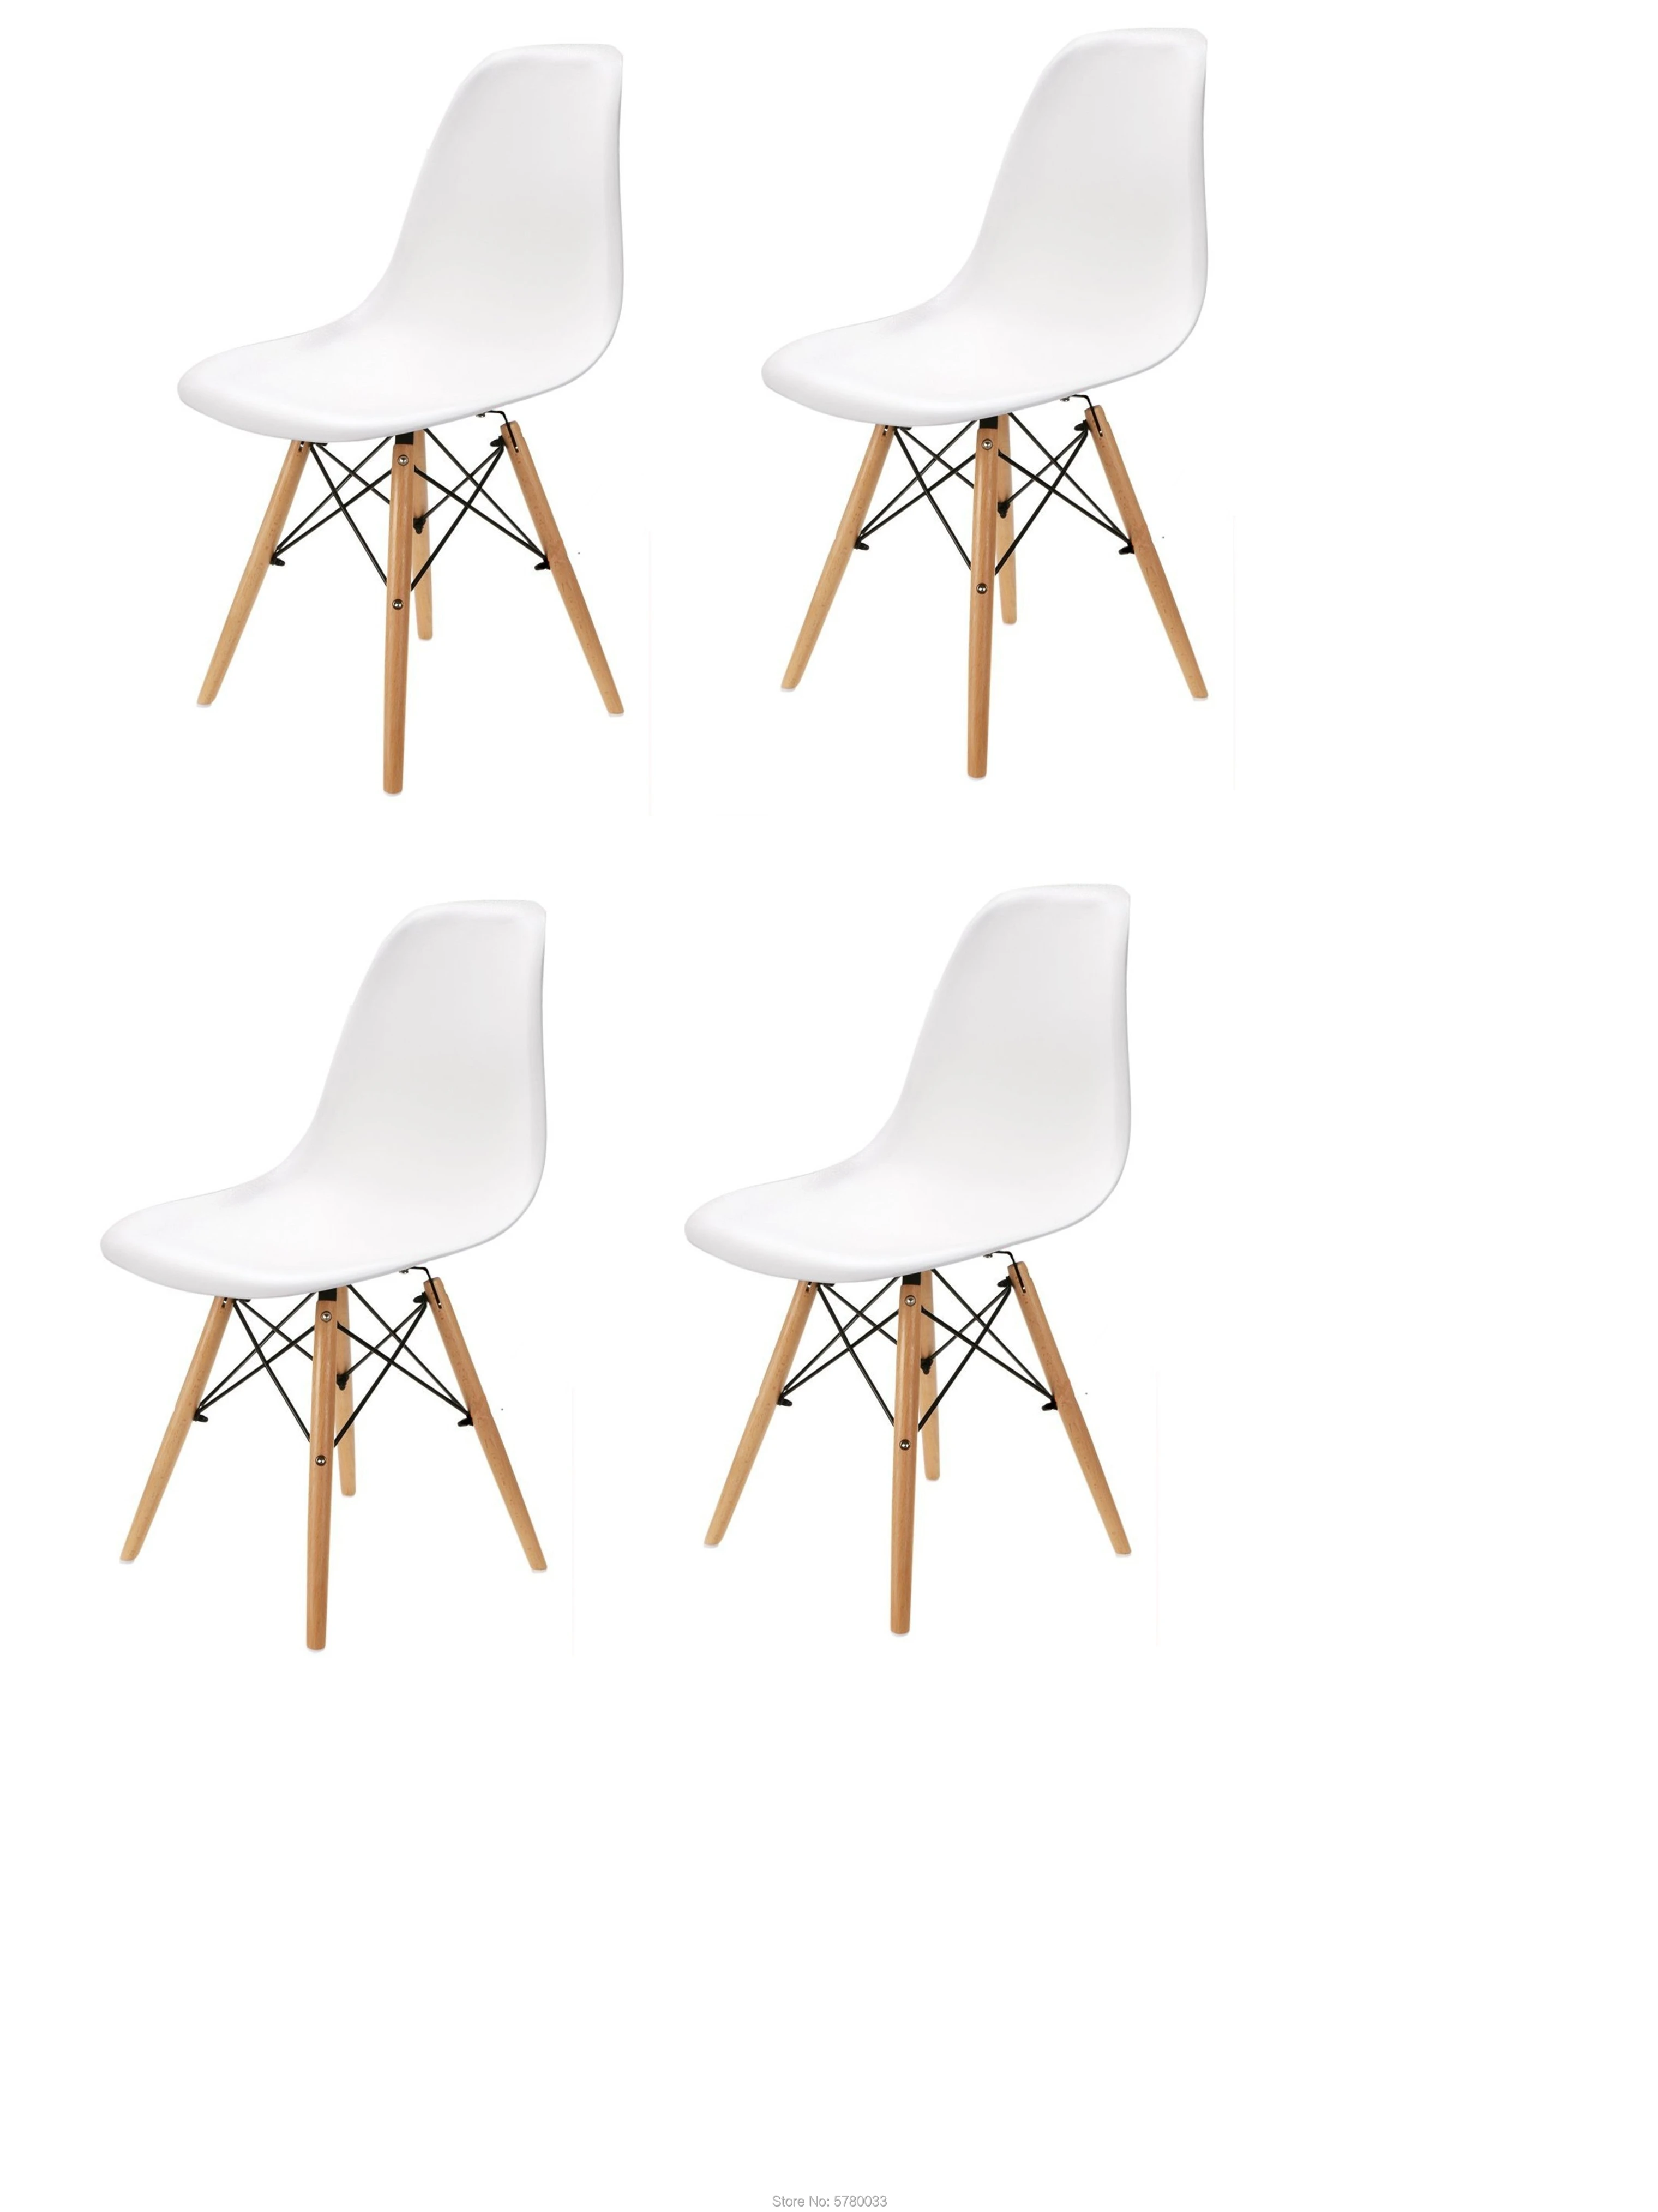 A Set Of 8 Modern Dining Chairs With Scandinavian Design And Medieval Style